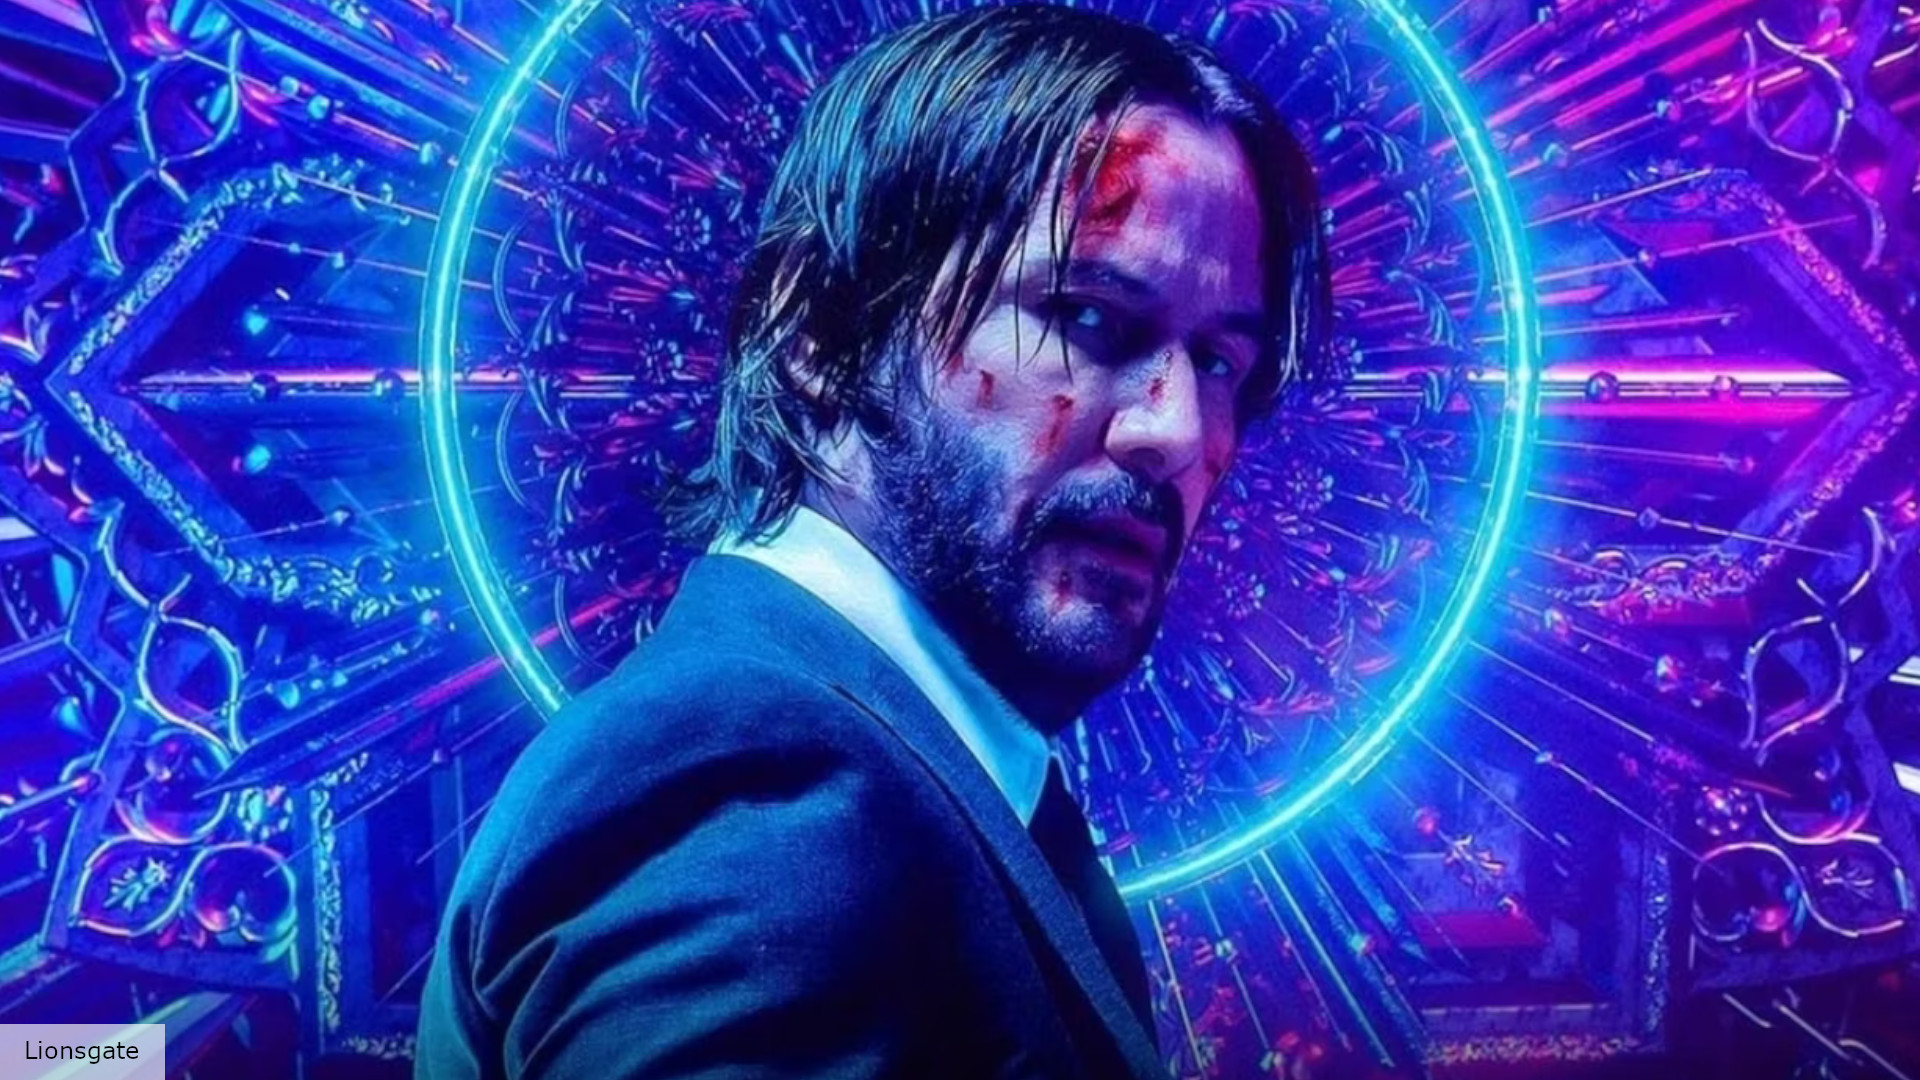 JohN Wick 4 leads our selection of new movies coming in 2023